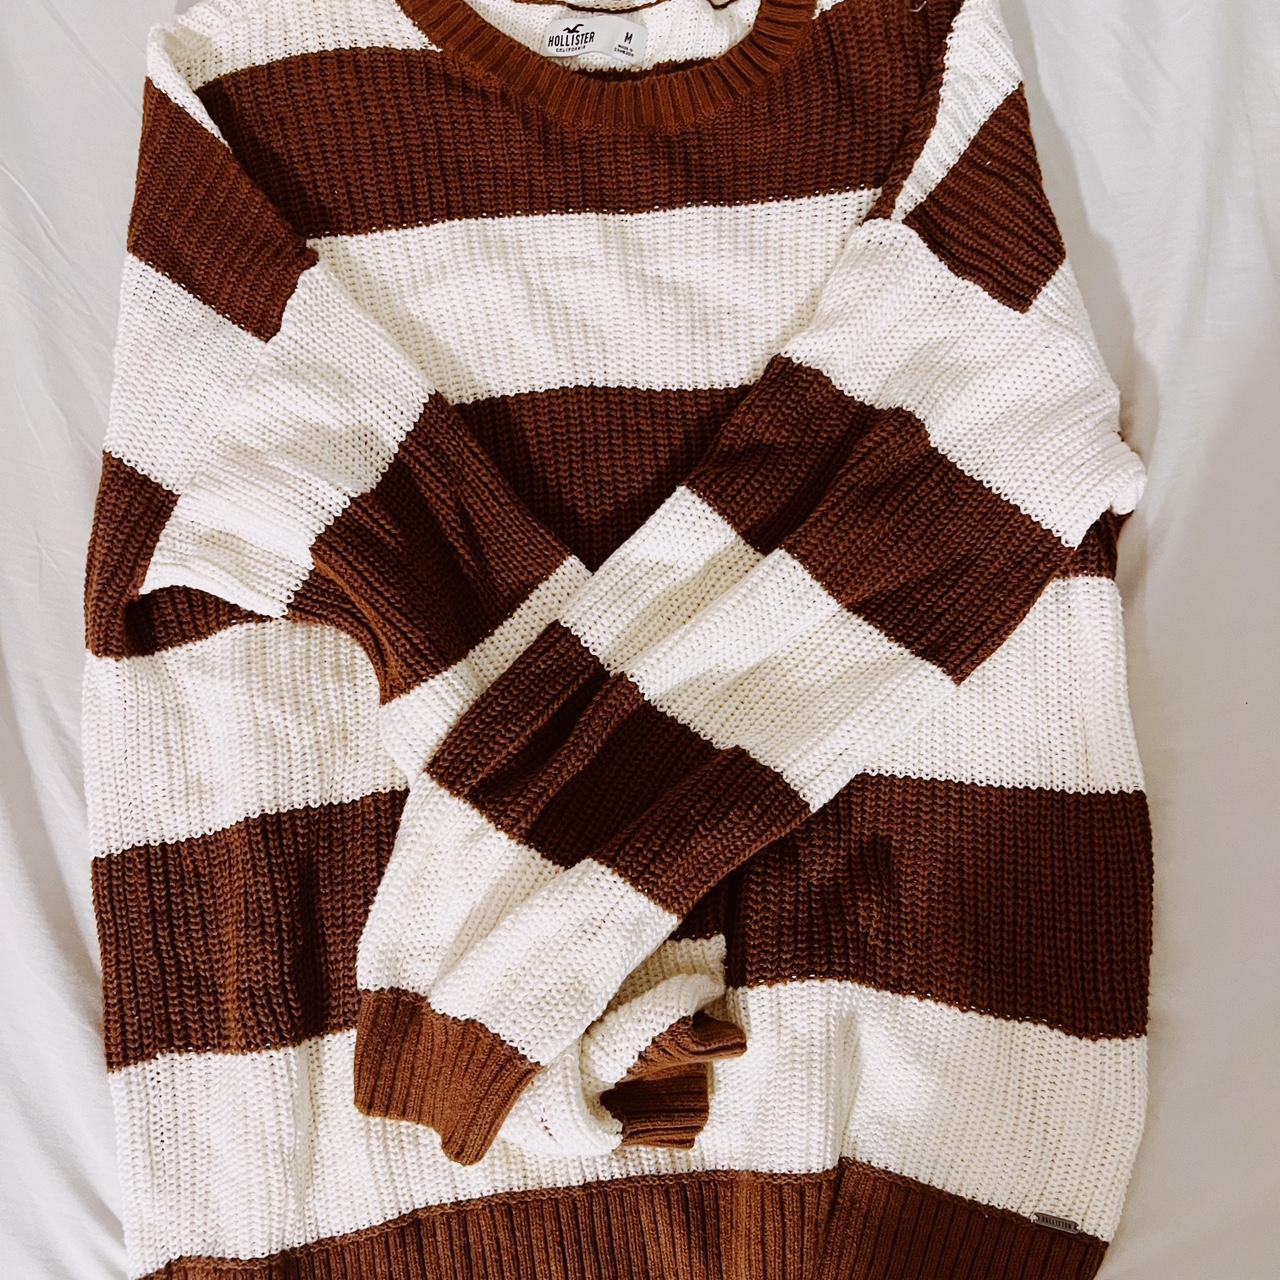 hollister brown and white knit sweater - size:... - Depop